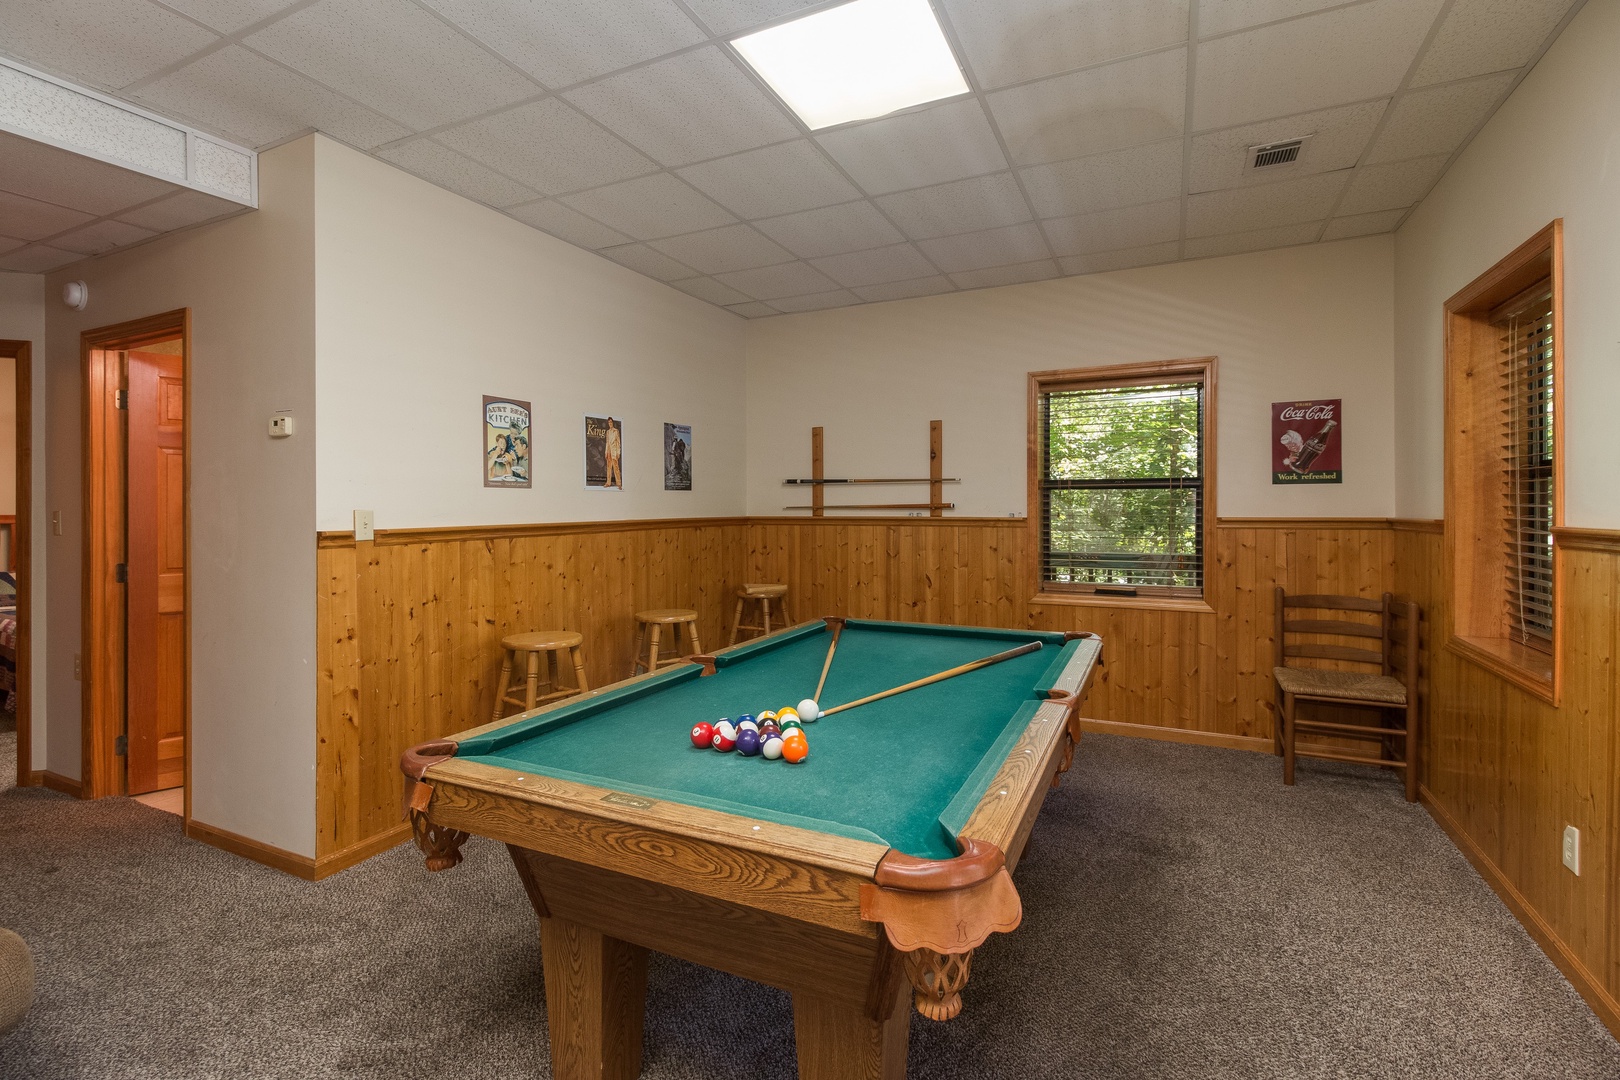 Pool table at Stones Throw, a 4 bedroom cabin rental located in Pigeon Forge